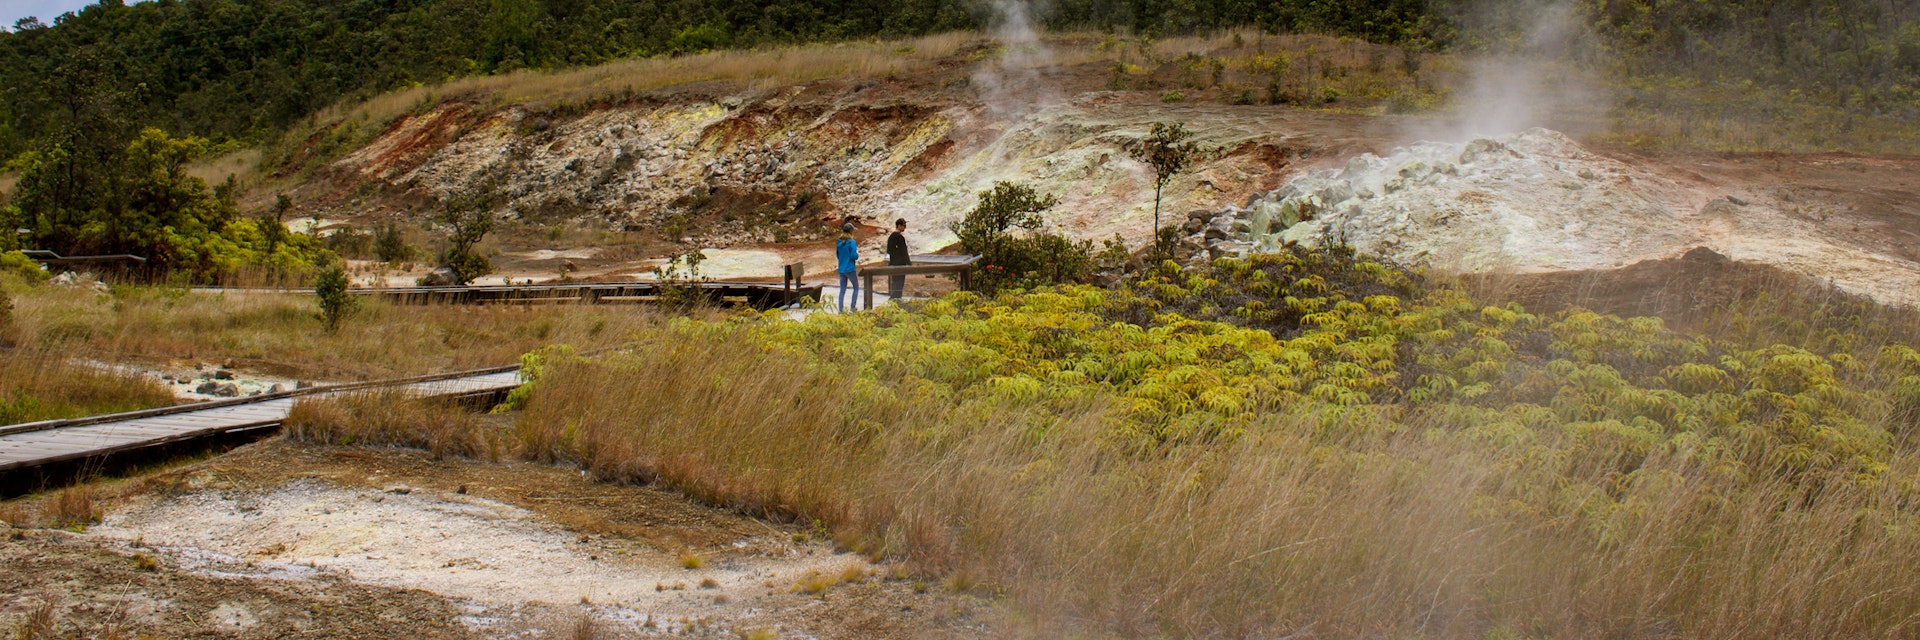 Tourists view the Sulphur banks that can be found walking along the boardwalk in Volcanoes National Park on the Big Island, Hawaii. Volcanic gases steam from the ground as sulphur vents / steam vents
1285860174
steam vents, sulphur vents, volcanoes national park, sulphur dioxide, attraction, tourists, trail, crater rim trail, soil acidity, pathways, cracks, magma, sulfur, rotten egg, hydrogen sulfide, h2s, so2, ground water, emitted, ha'akulamanu, vaporizes, steaming bluff, wahinekapu, tourist attraction, volcanic gases, sulphur vent, sulfur vent, sulphur bank, steam banks, big island, hawaii